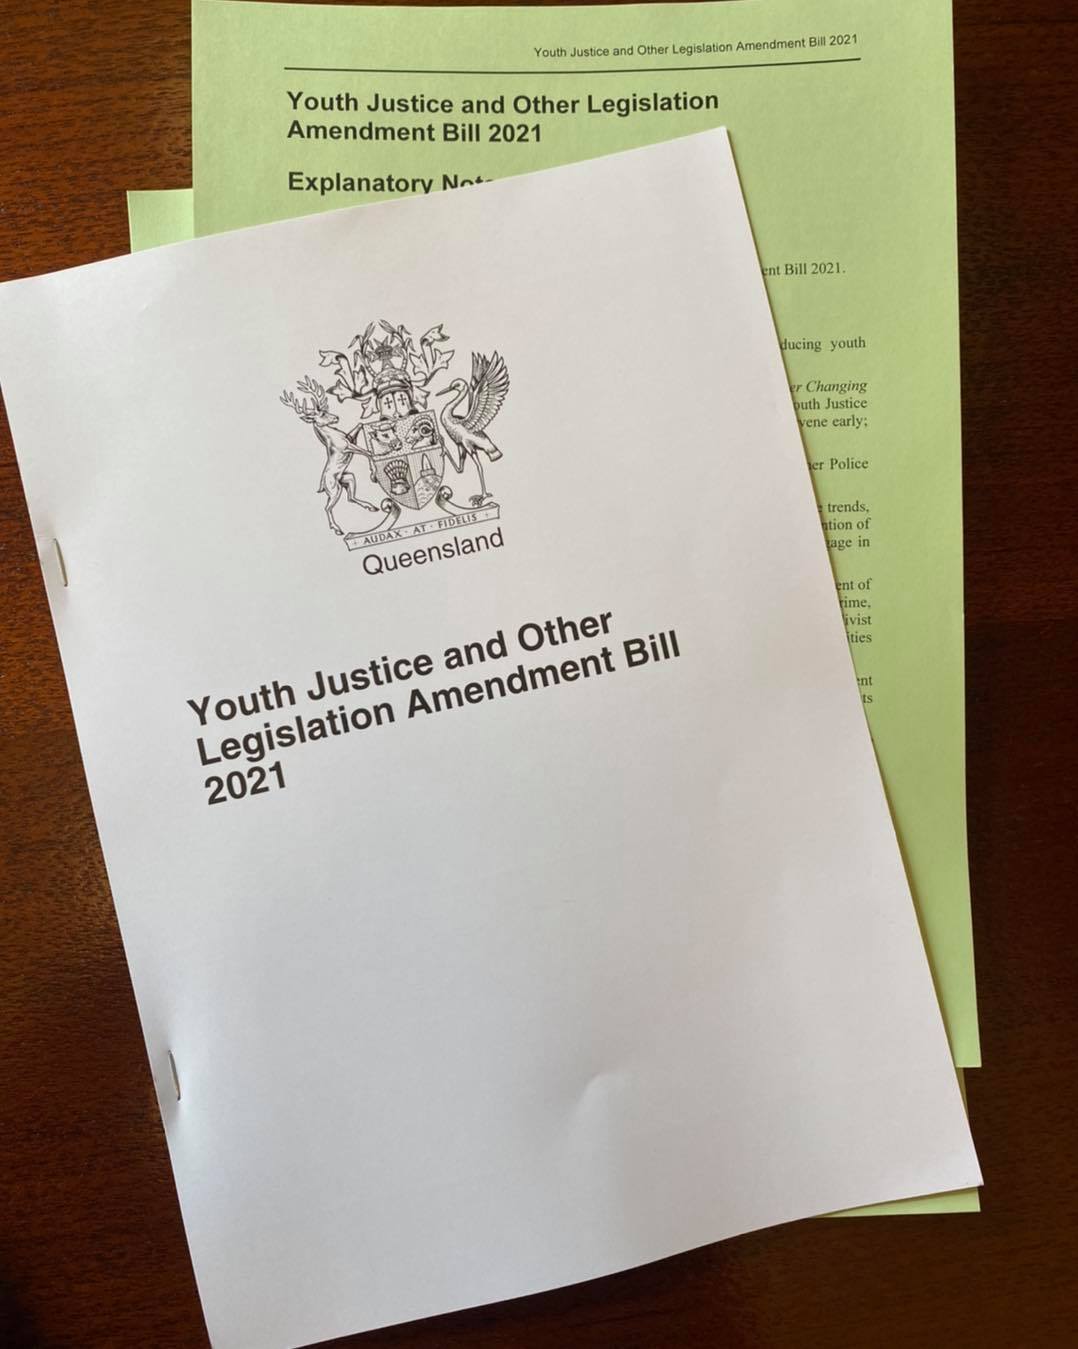 Youth Justice and Other Legislation Amendment Bill 2021.